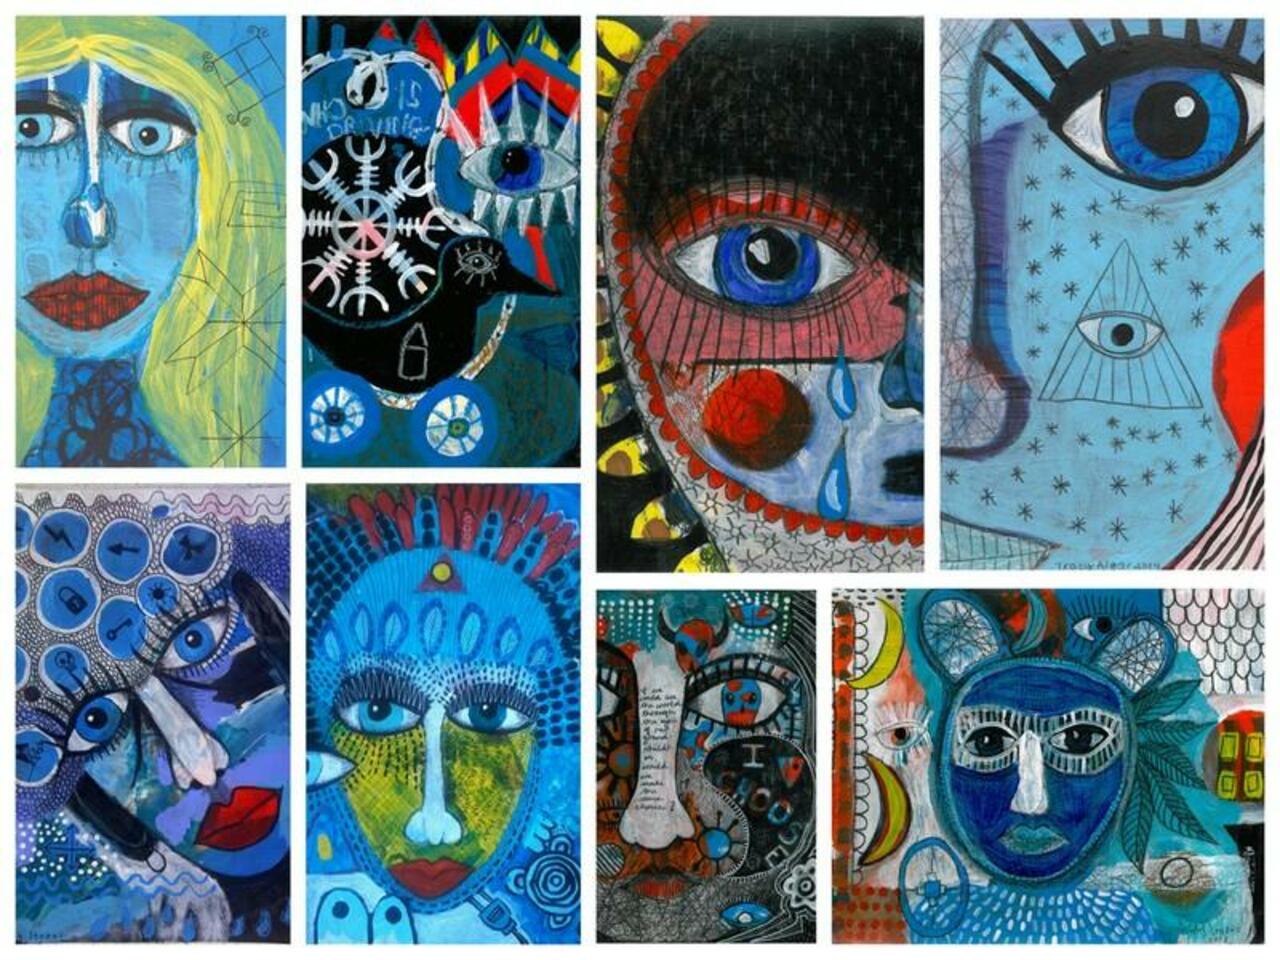 Eight paintings winging their way to their new owners in San Diego #art #mixedmedia #primitivesurrealism #artbrut http://t.co/J1AaOnWI9v